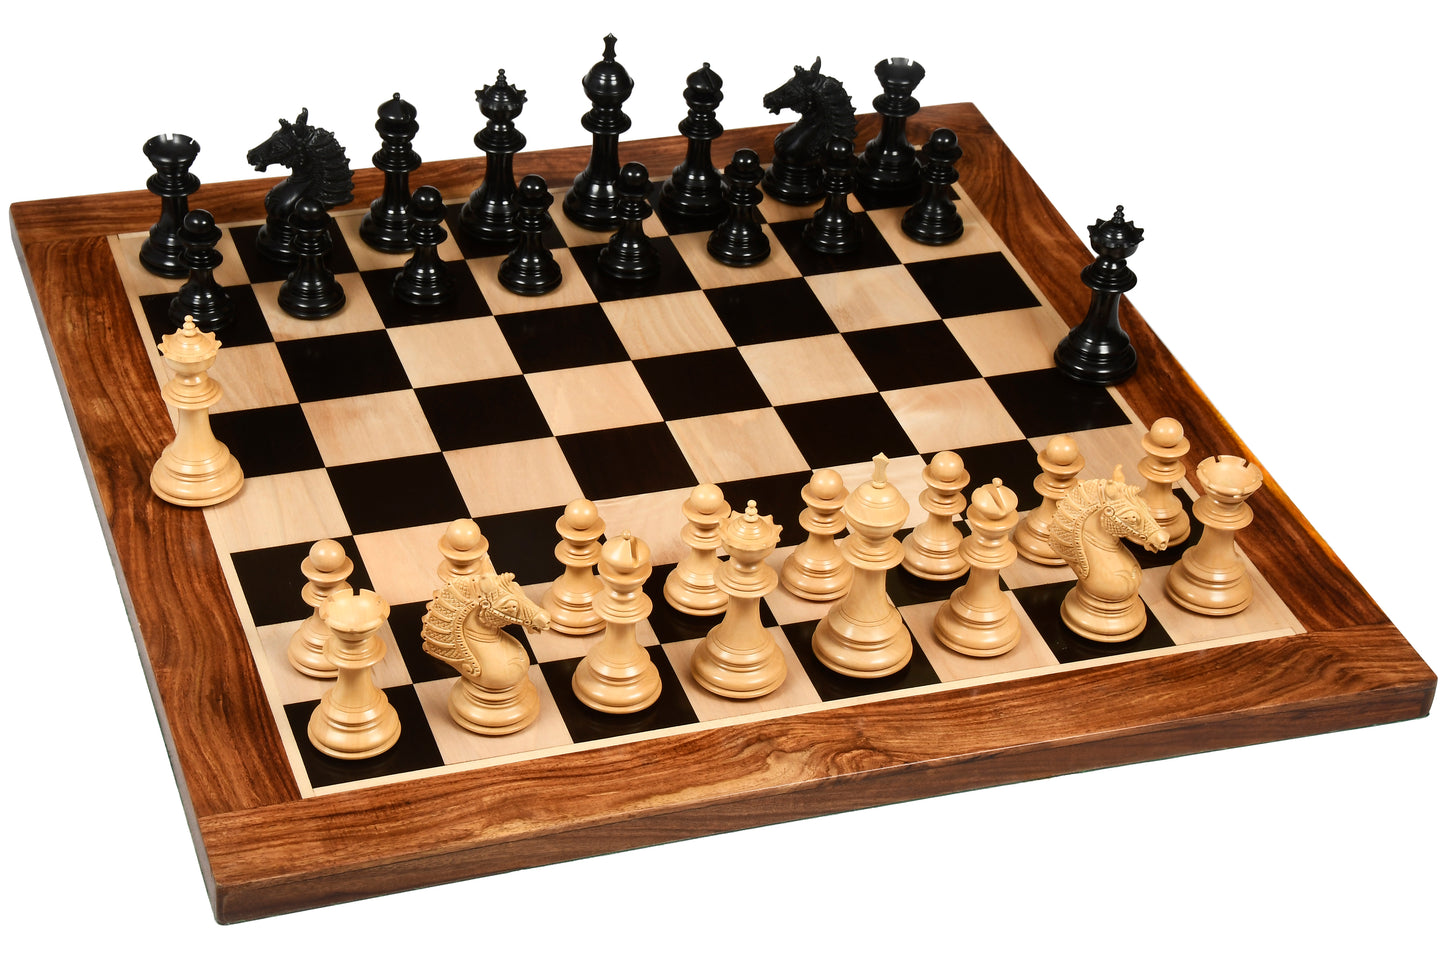 The Sikh Empire Series Triple Weighted Wooden Handmade Chess Pieces in Genuine Ebony Wood and Indian Boxwood - 4.5" King with Extra Queens